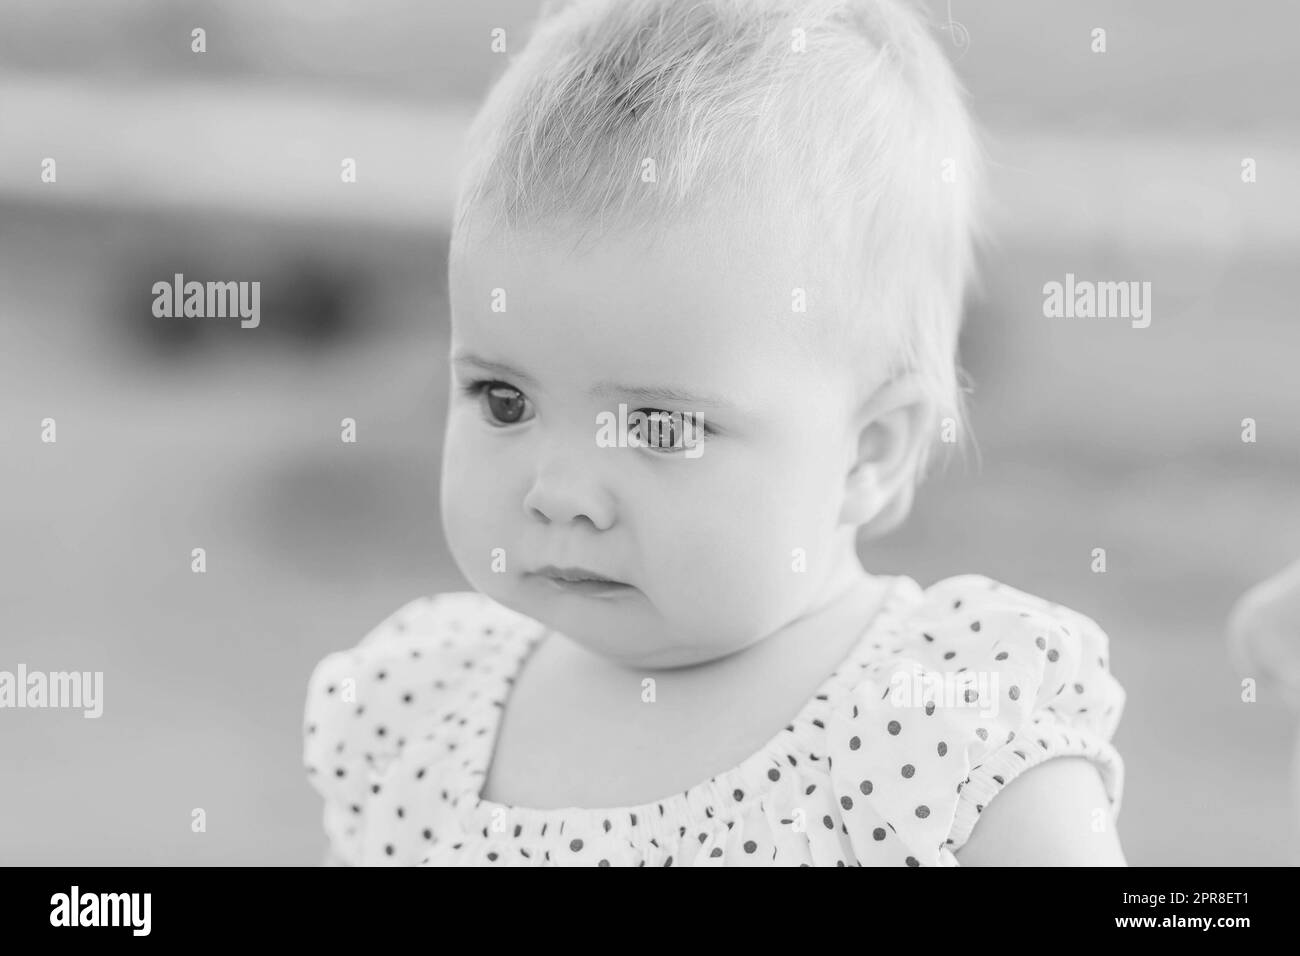 black and white photo of adorable baby in polka dot dress Stock Photo